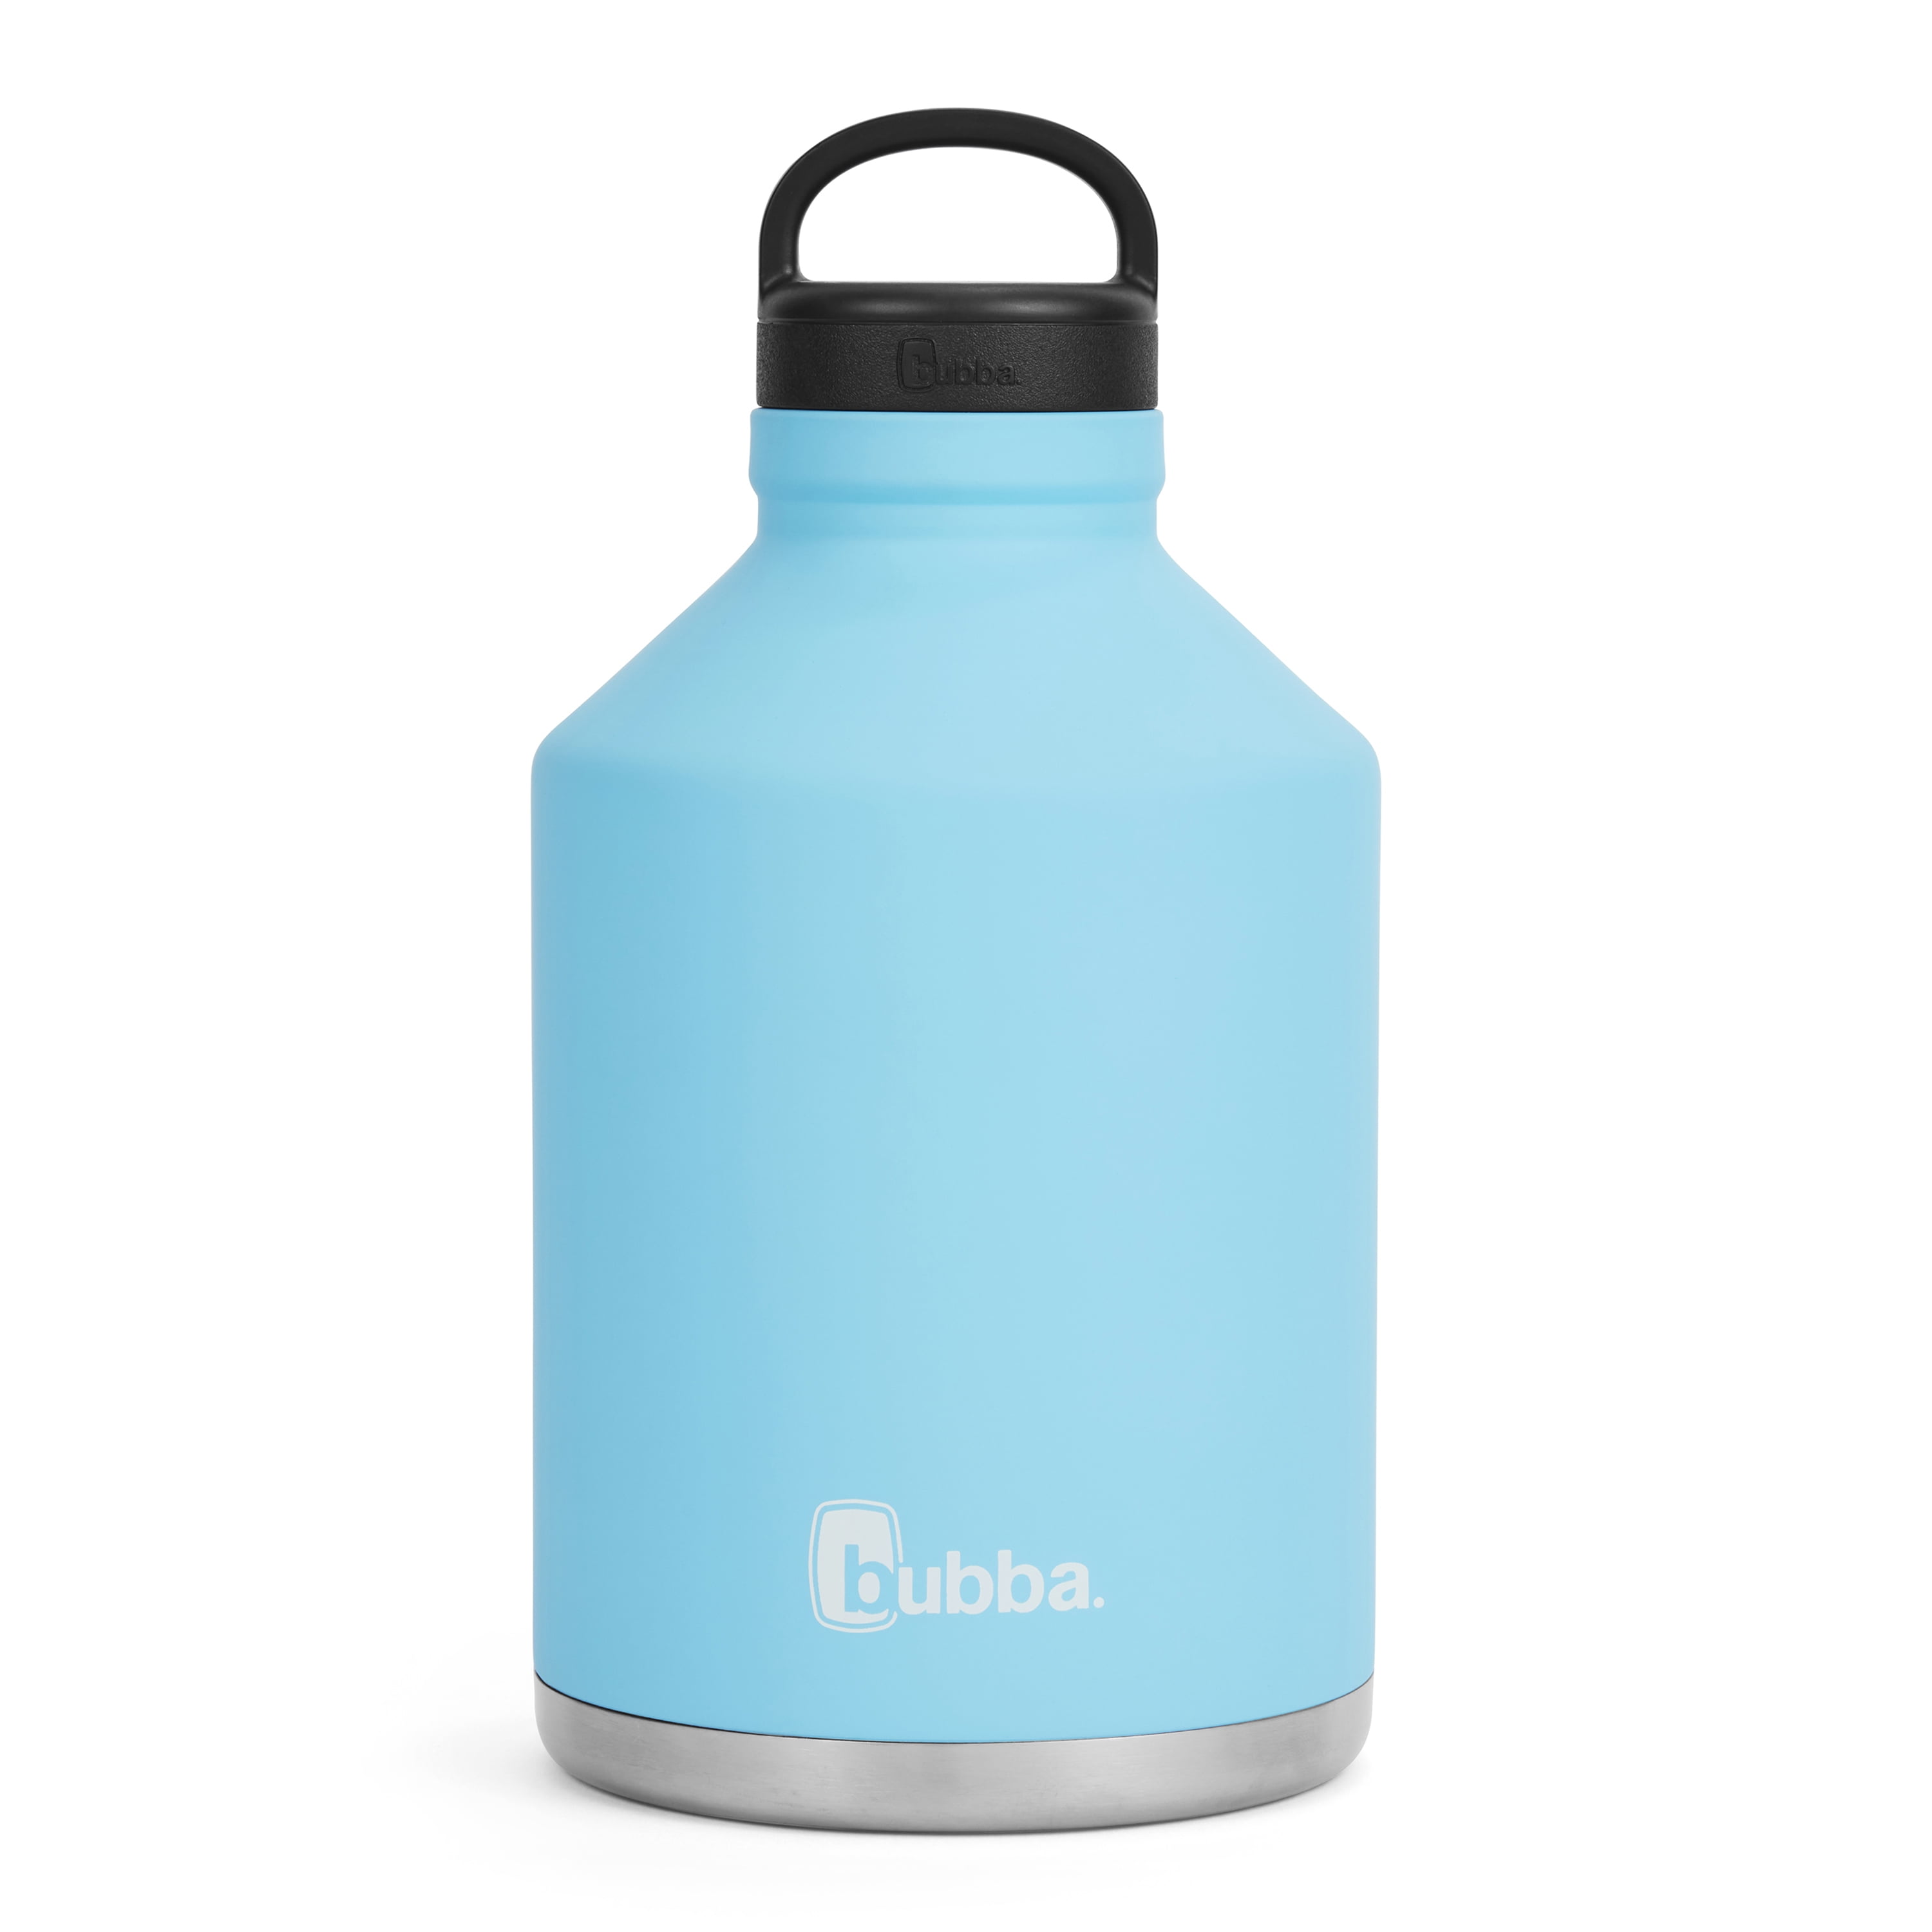 bubba Trailblazer, Vacuum-Insulated Stainless Steel Water Bottle with Push  Button Lid, 24 oz., Very Berry Blue